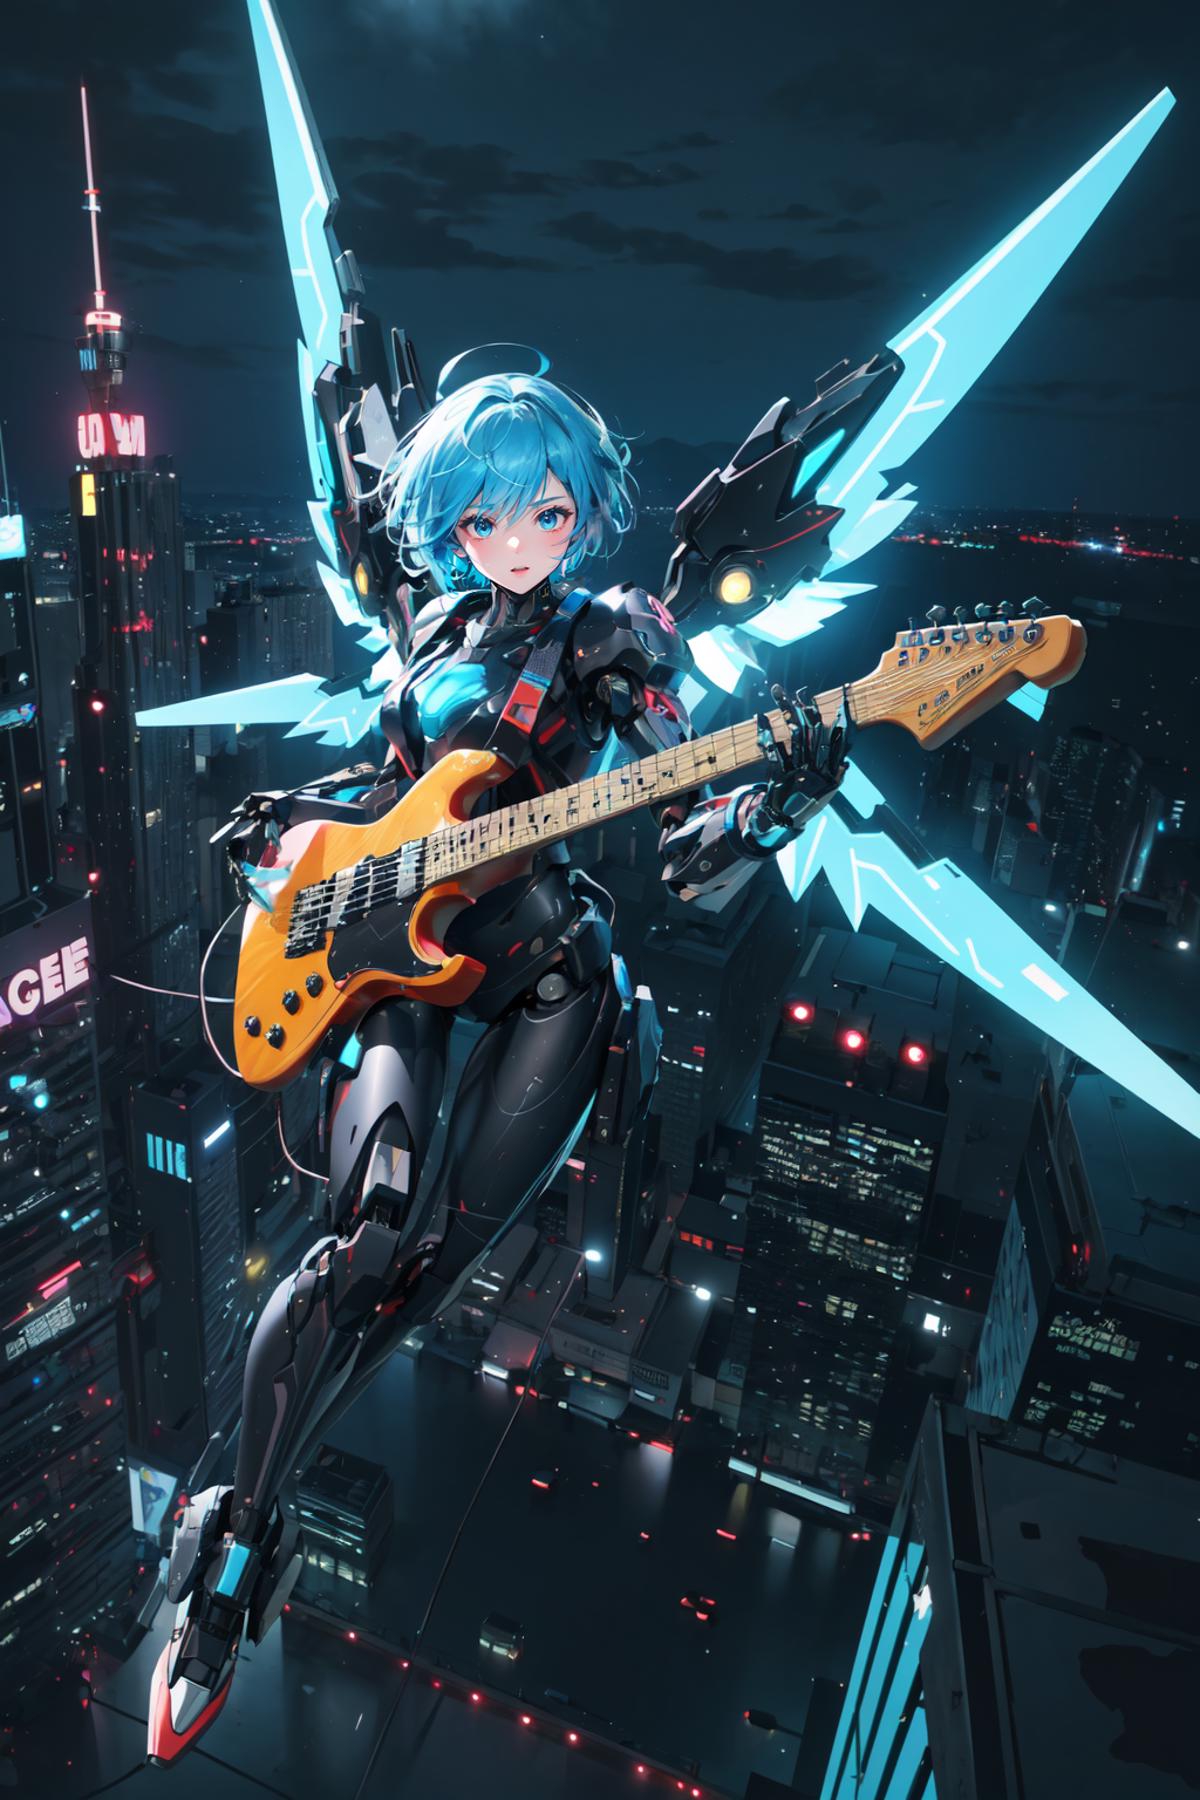 Guitars - Electric and Acoustic (Lycoris) image by leesoonfe